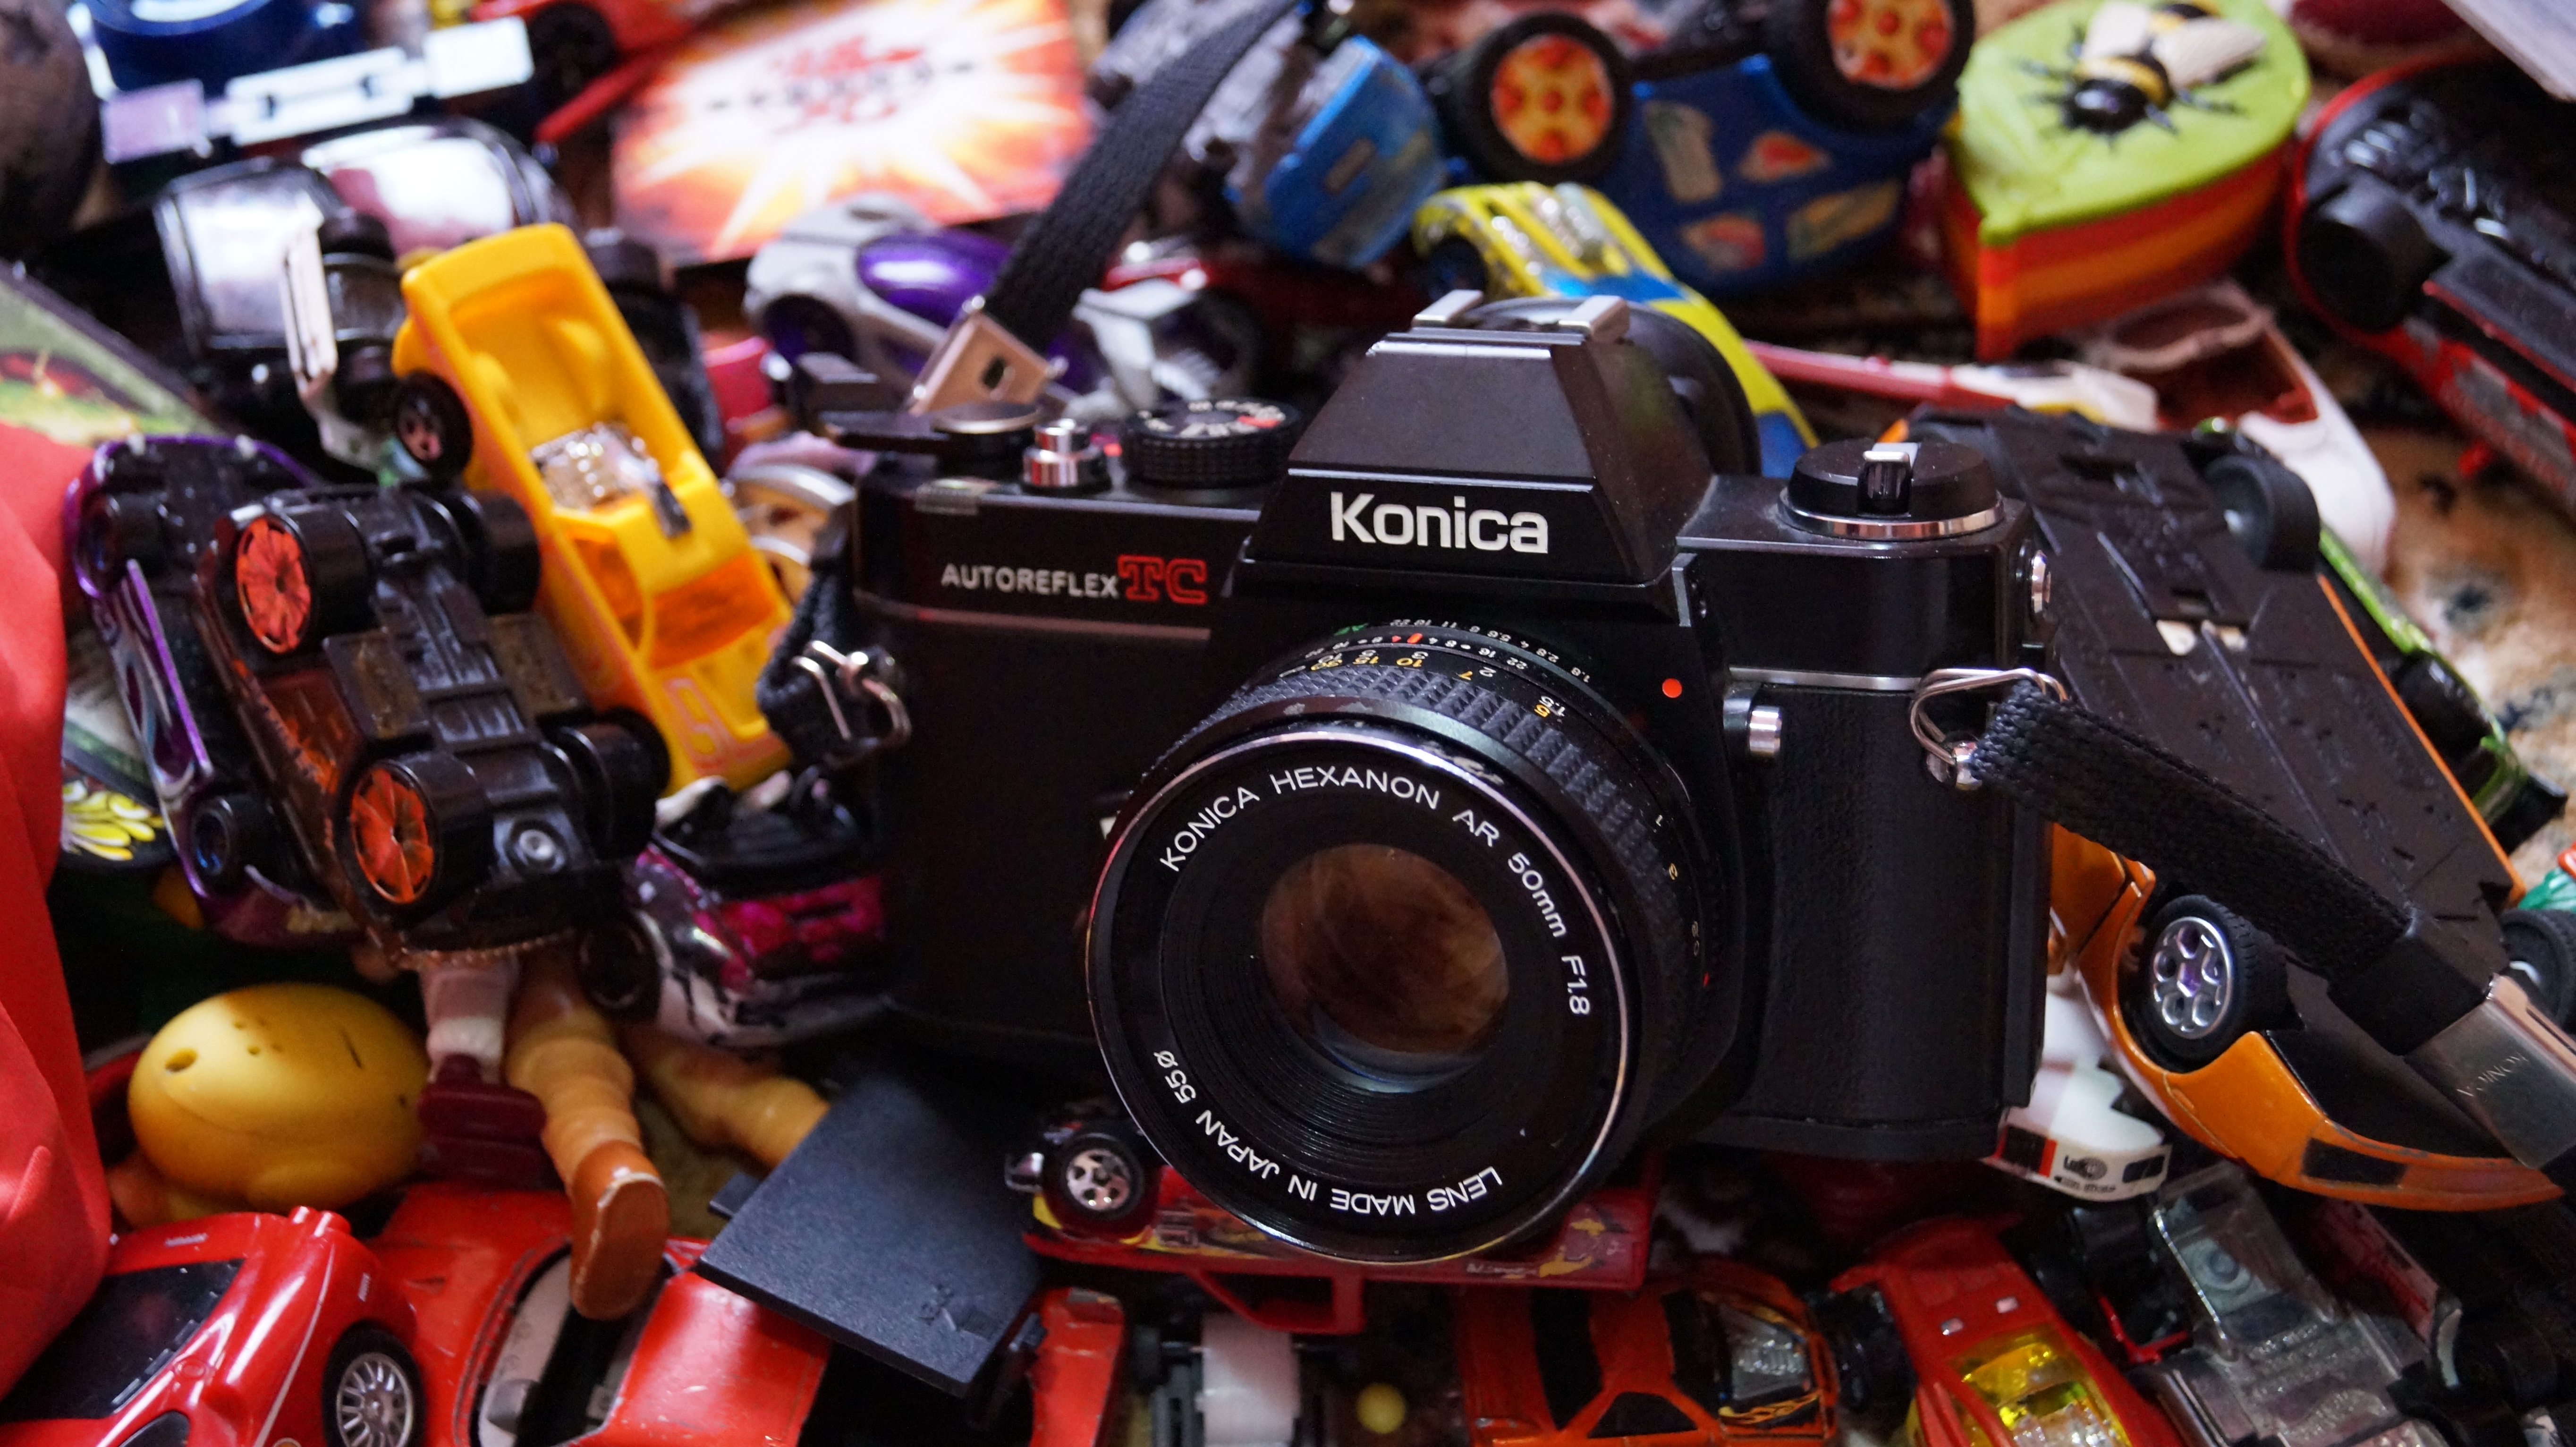 Konica Camera by Audron